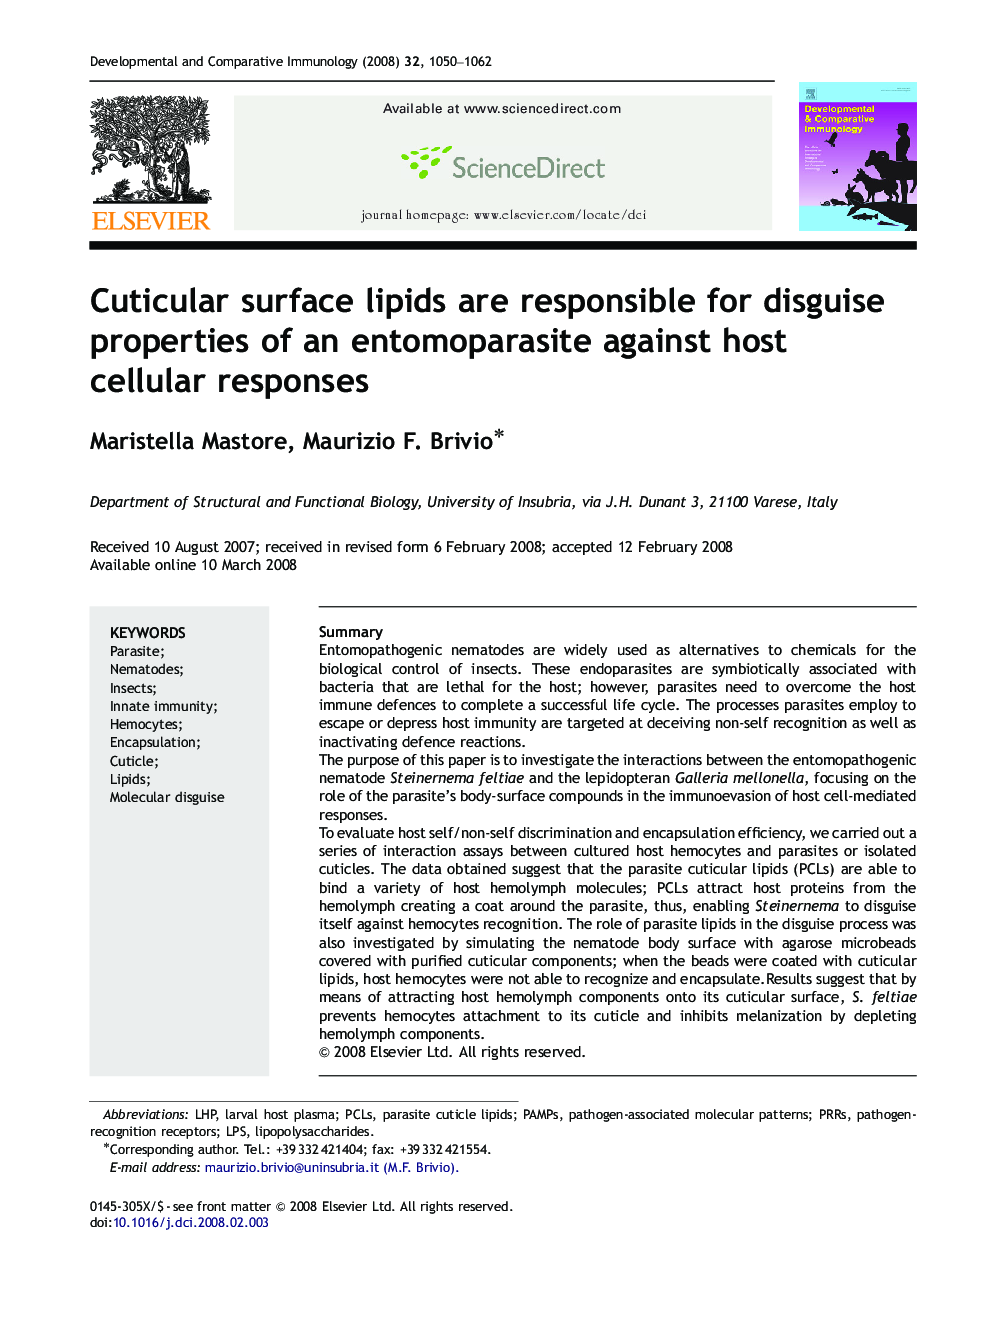 Cuticular surface lipids are responsible for disguise properties of an entomoparasite against host cellular responses